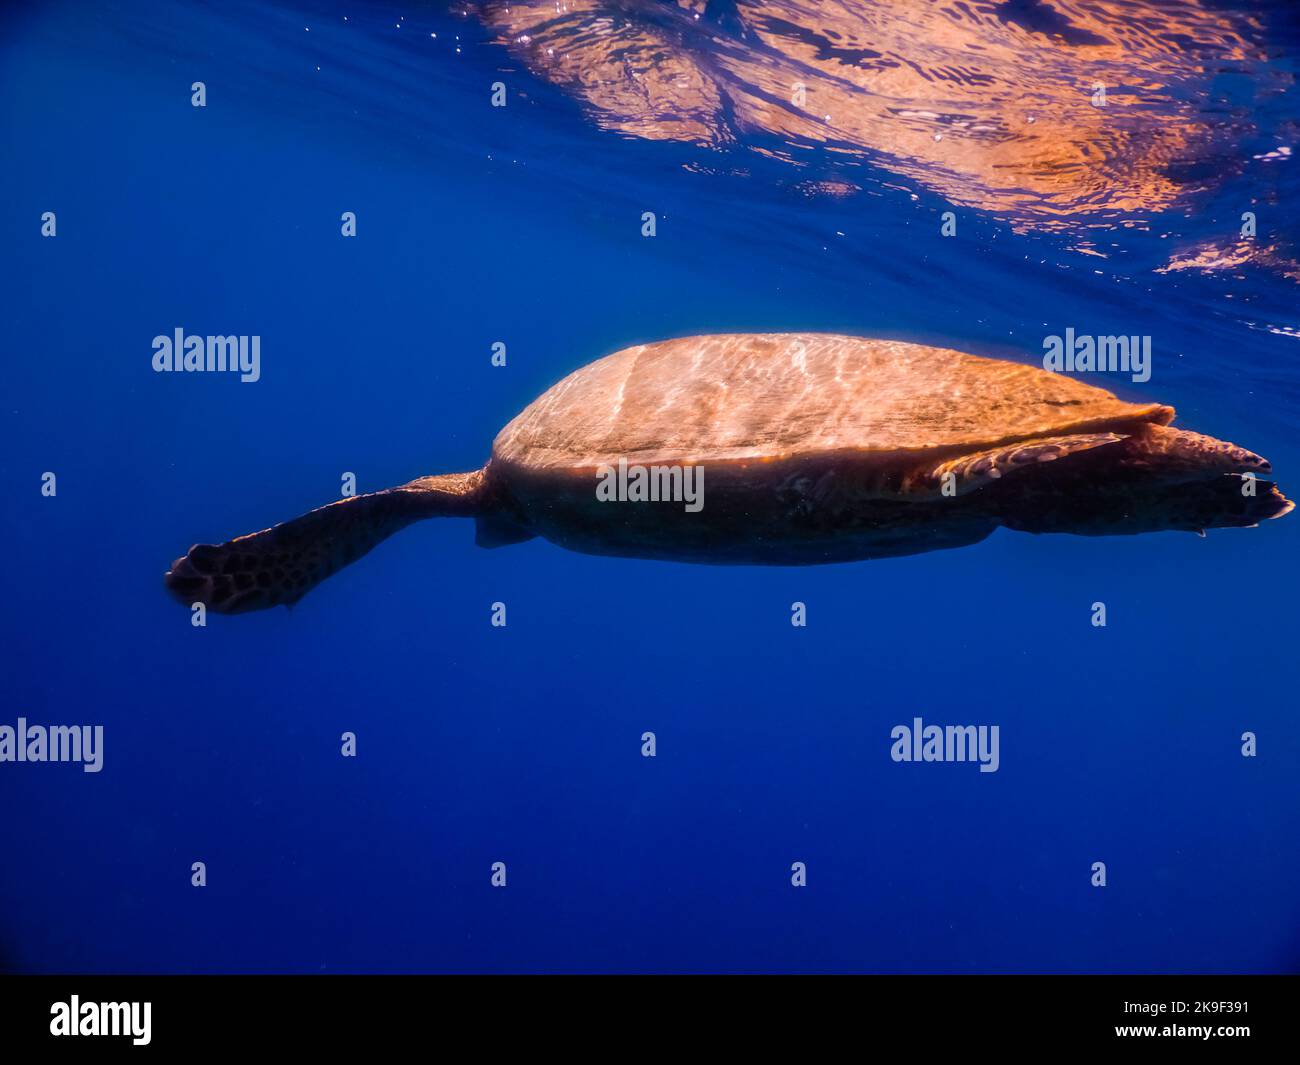 single green sea turtle after breathing at the surface in deep blue water with reflection Stock Photo